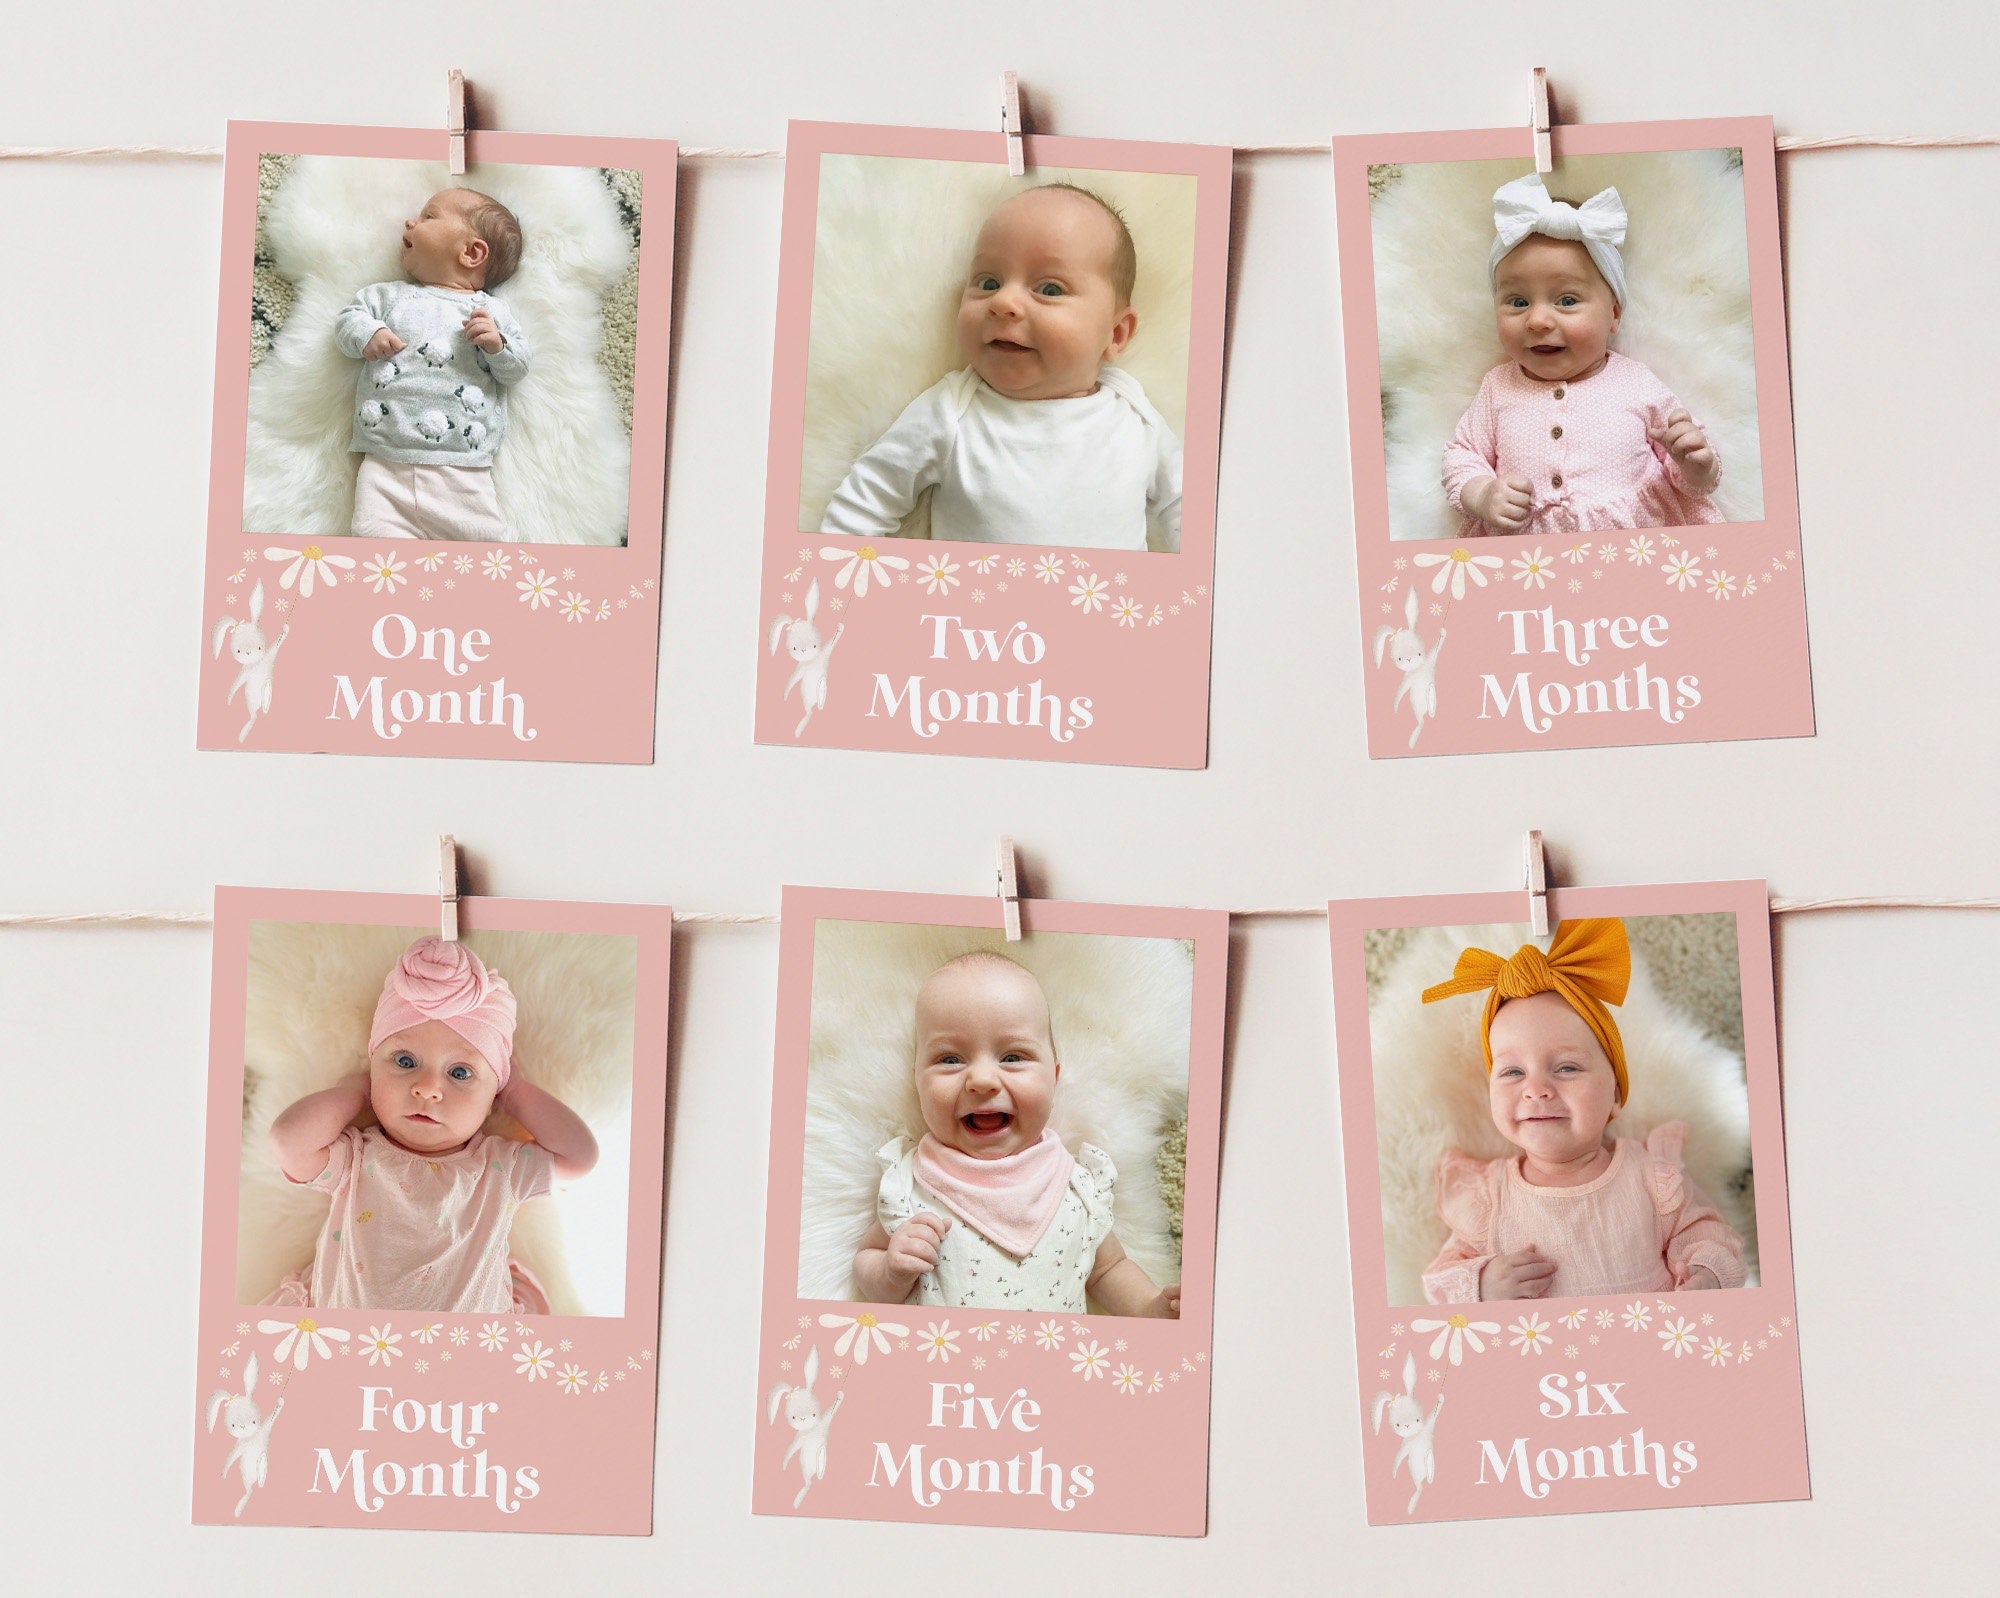 Some Bunny 12 Month Photo Banner, 1st Birthday Milestone Photos, Baby's First Year Monthly Photo Banner, 1st Birthday Decor, One Year Banner